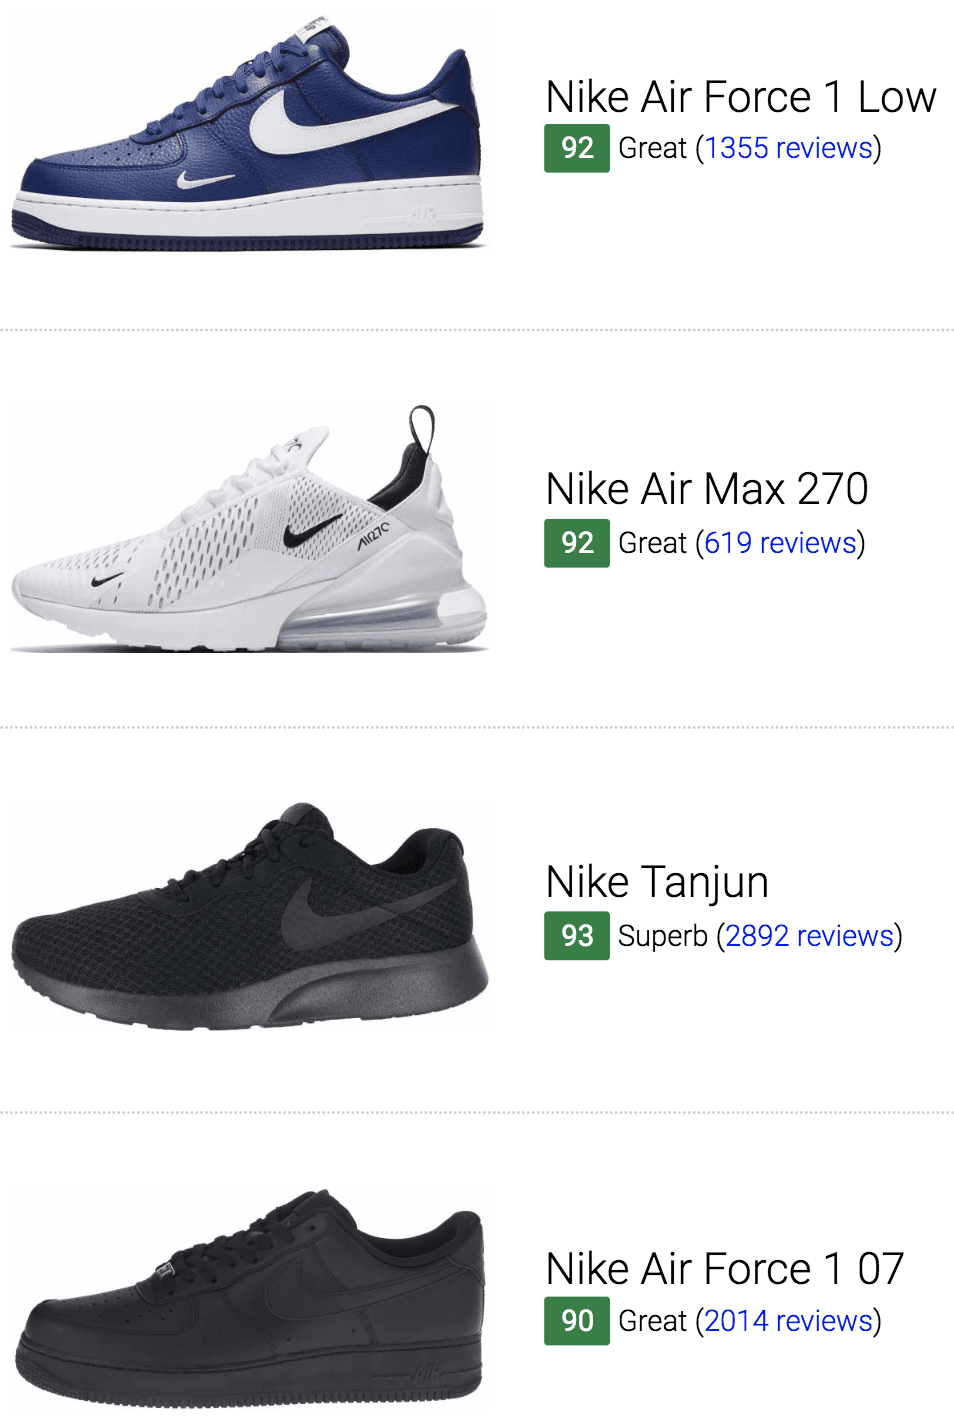 nike shoes price list 2019 off 52 